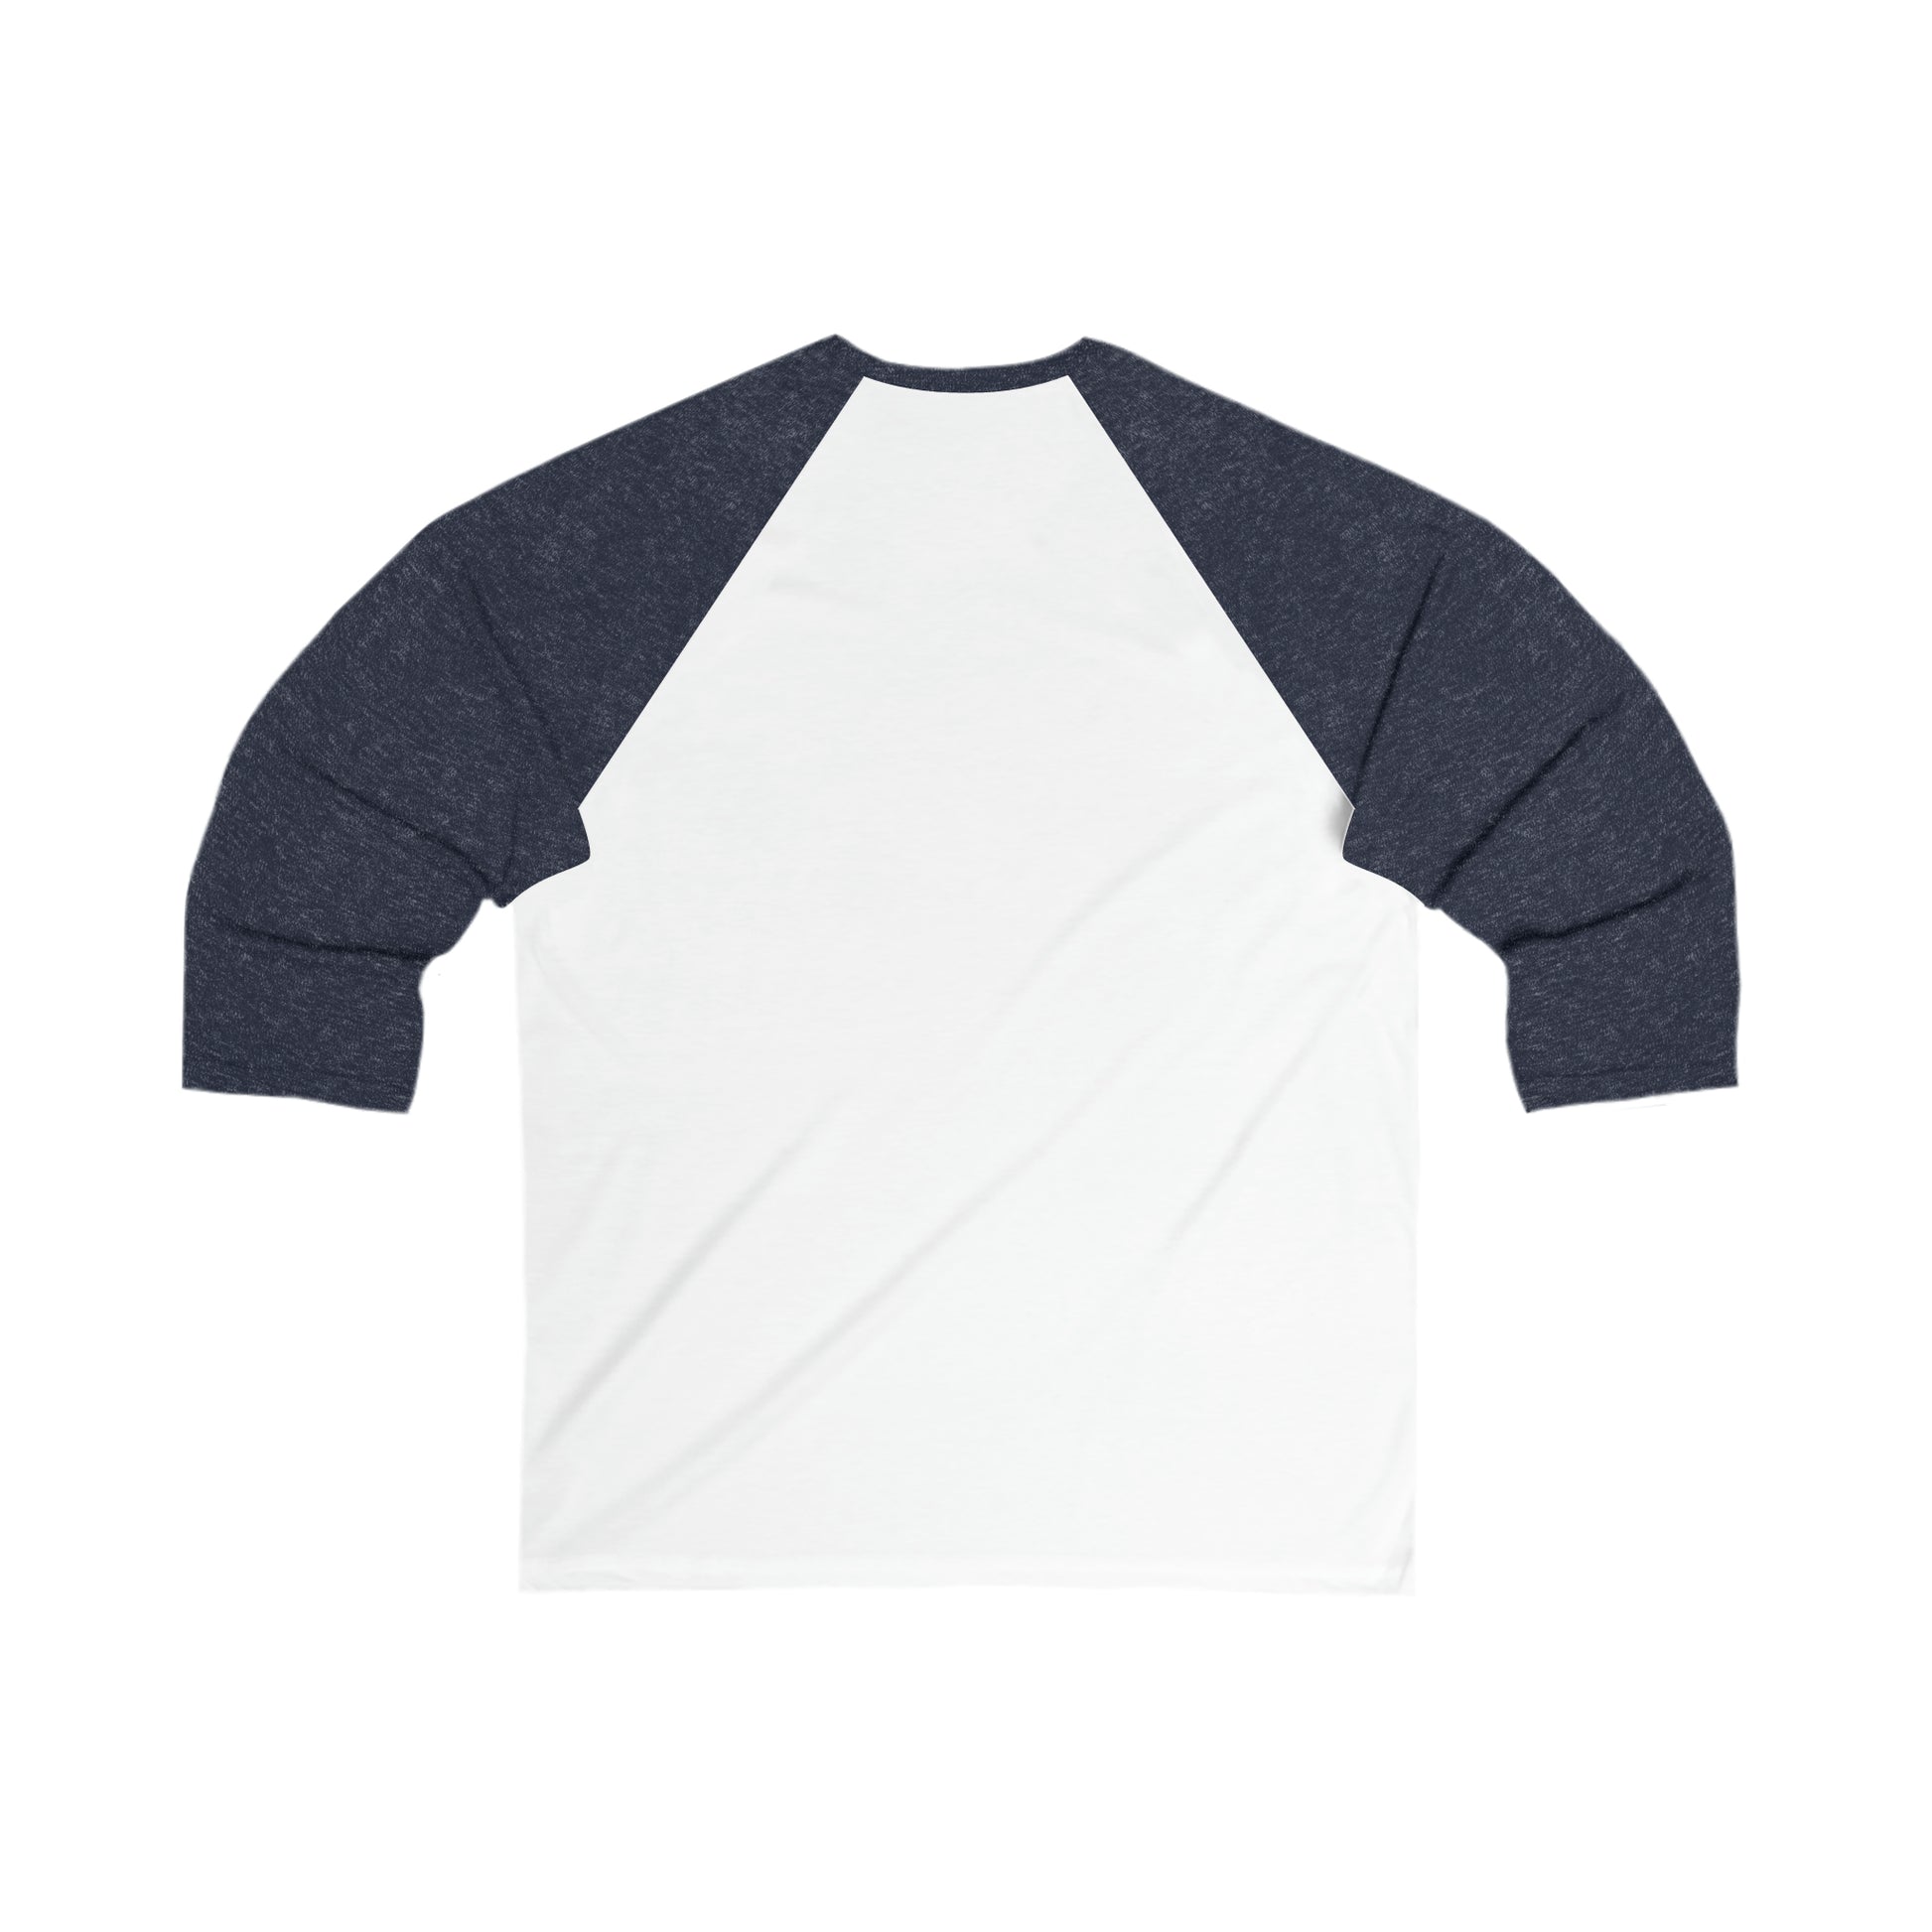 A Printify Unisex 3\4 Sleeve Logo Baseball Tee with a white torso and dark grey sleeves, featuring a Toronto Cabbagetown logo, displayed flat on a white background.